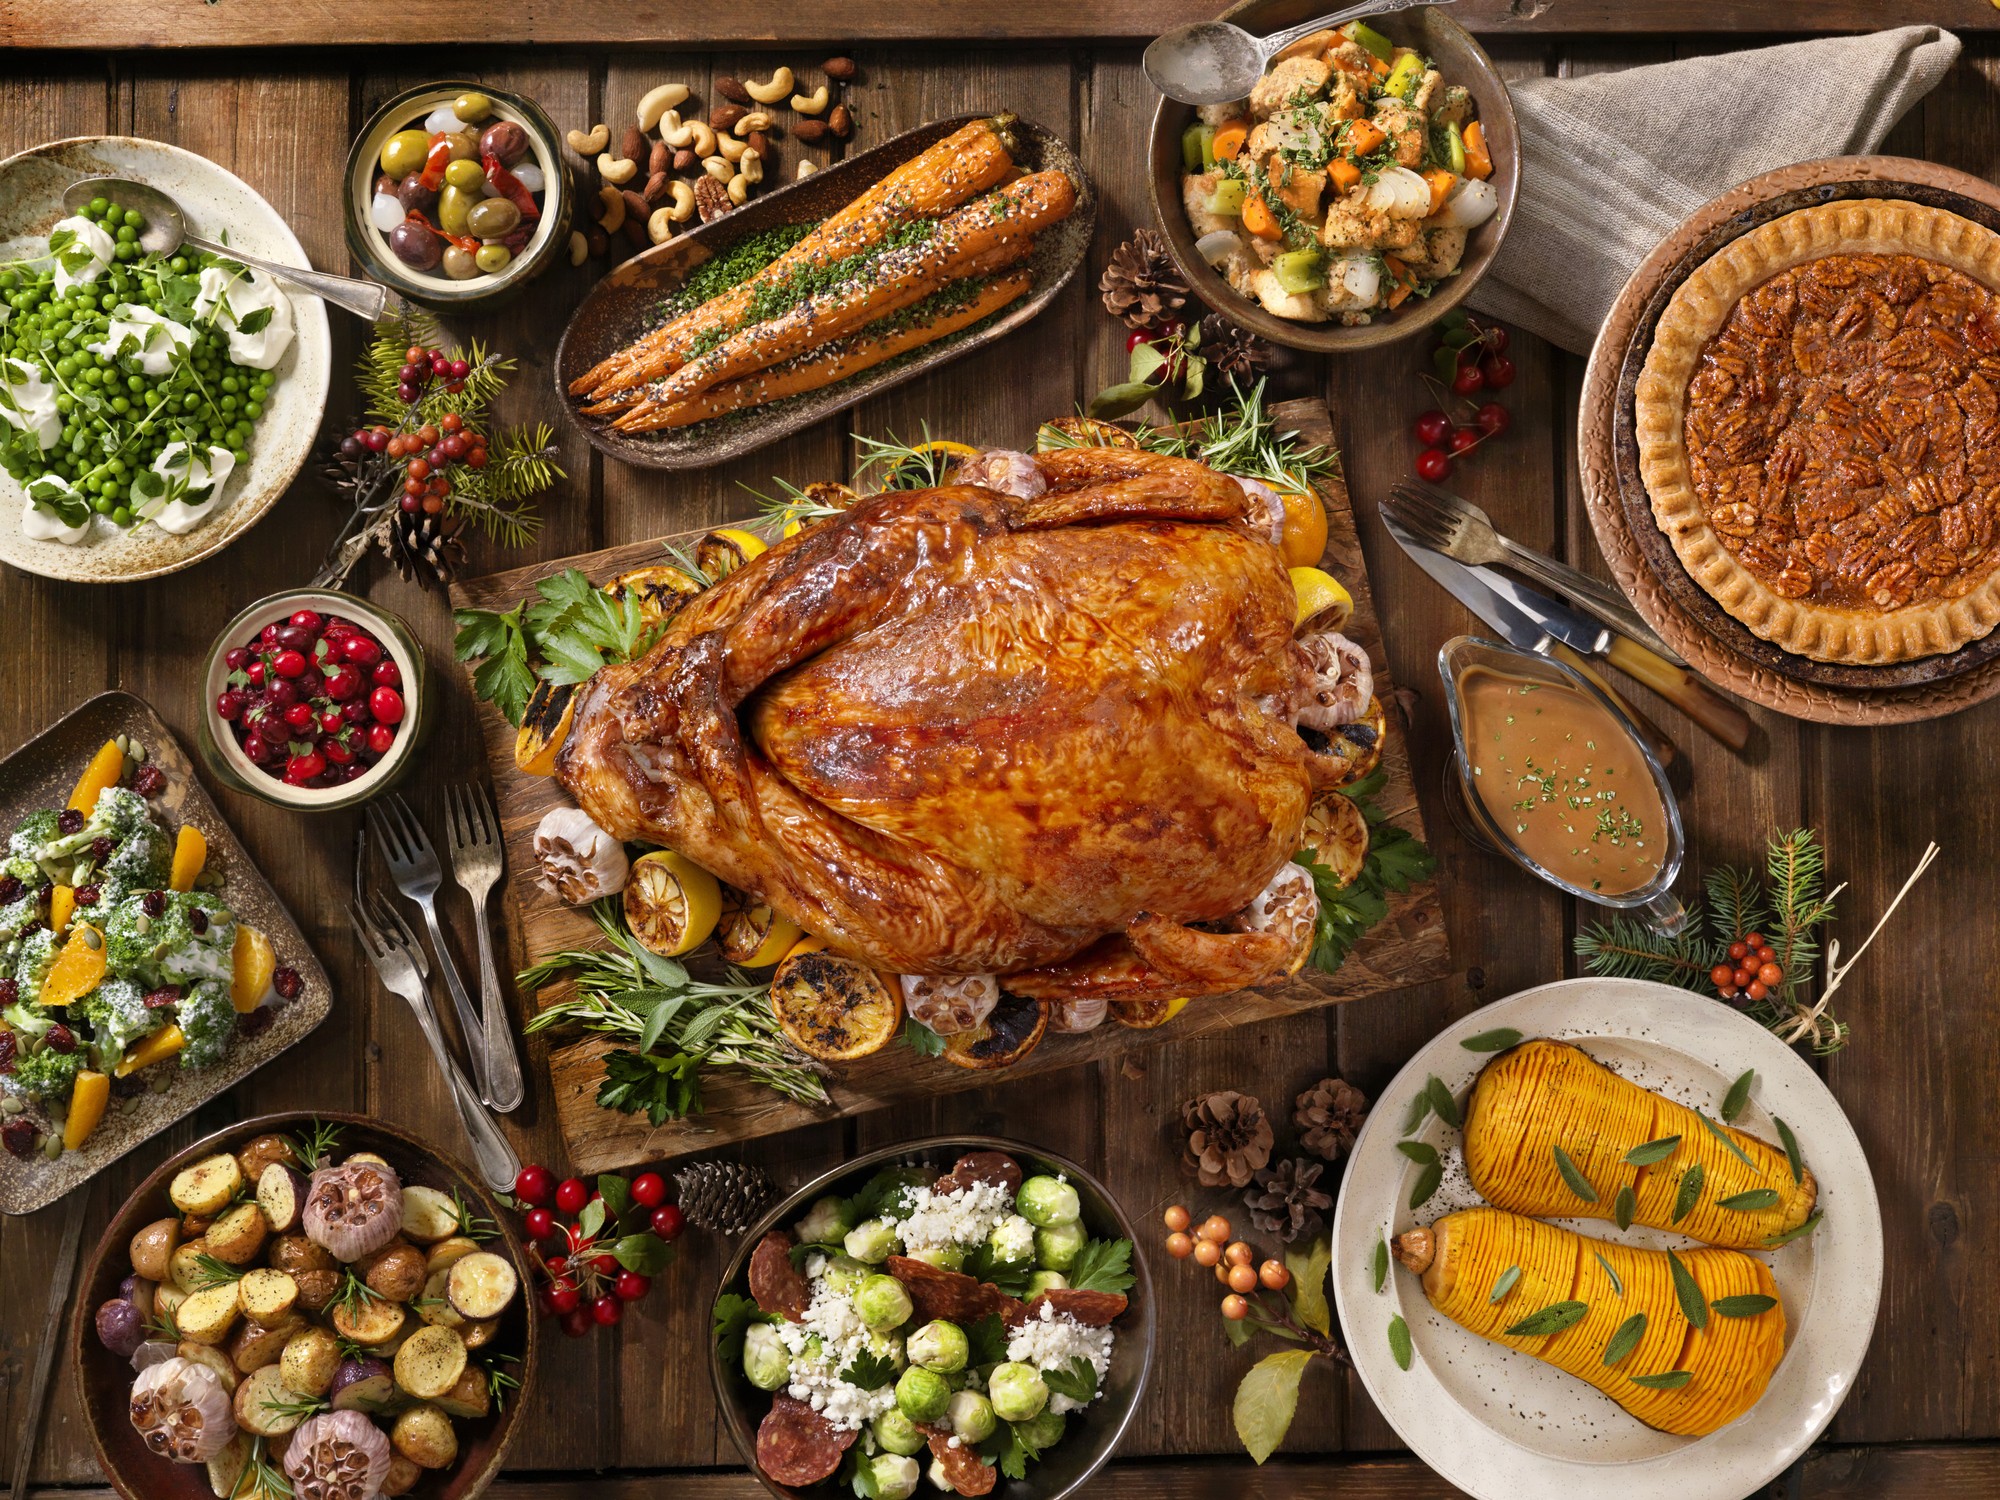 The traditional Christmas lunch offers a real treat for food lovers – but also the temptation to over eat, so be selective – and eat slowly so you enjoy the occasion as well as the food.